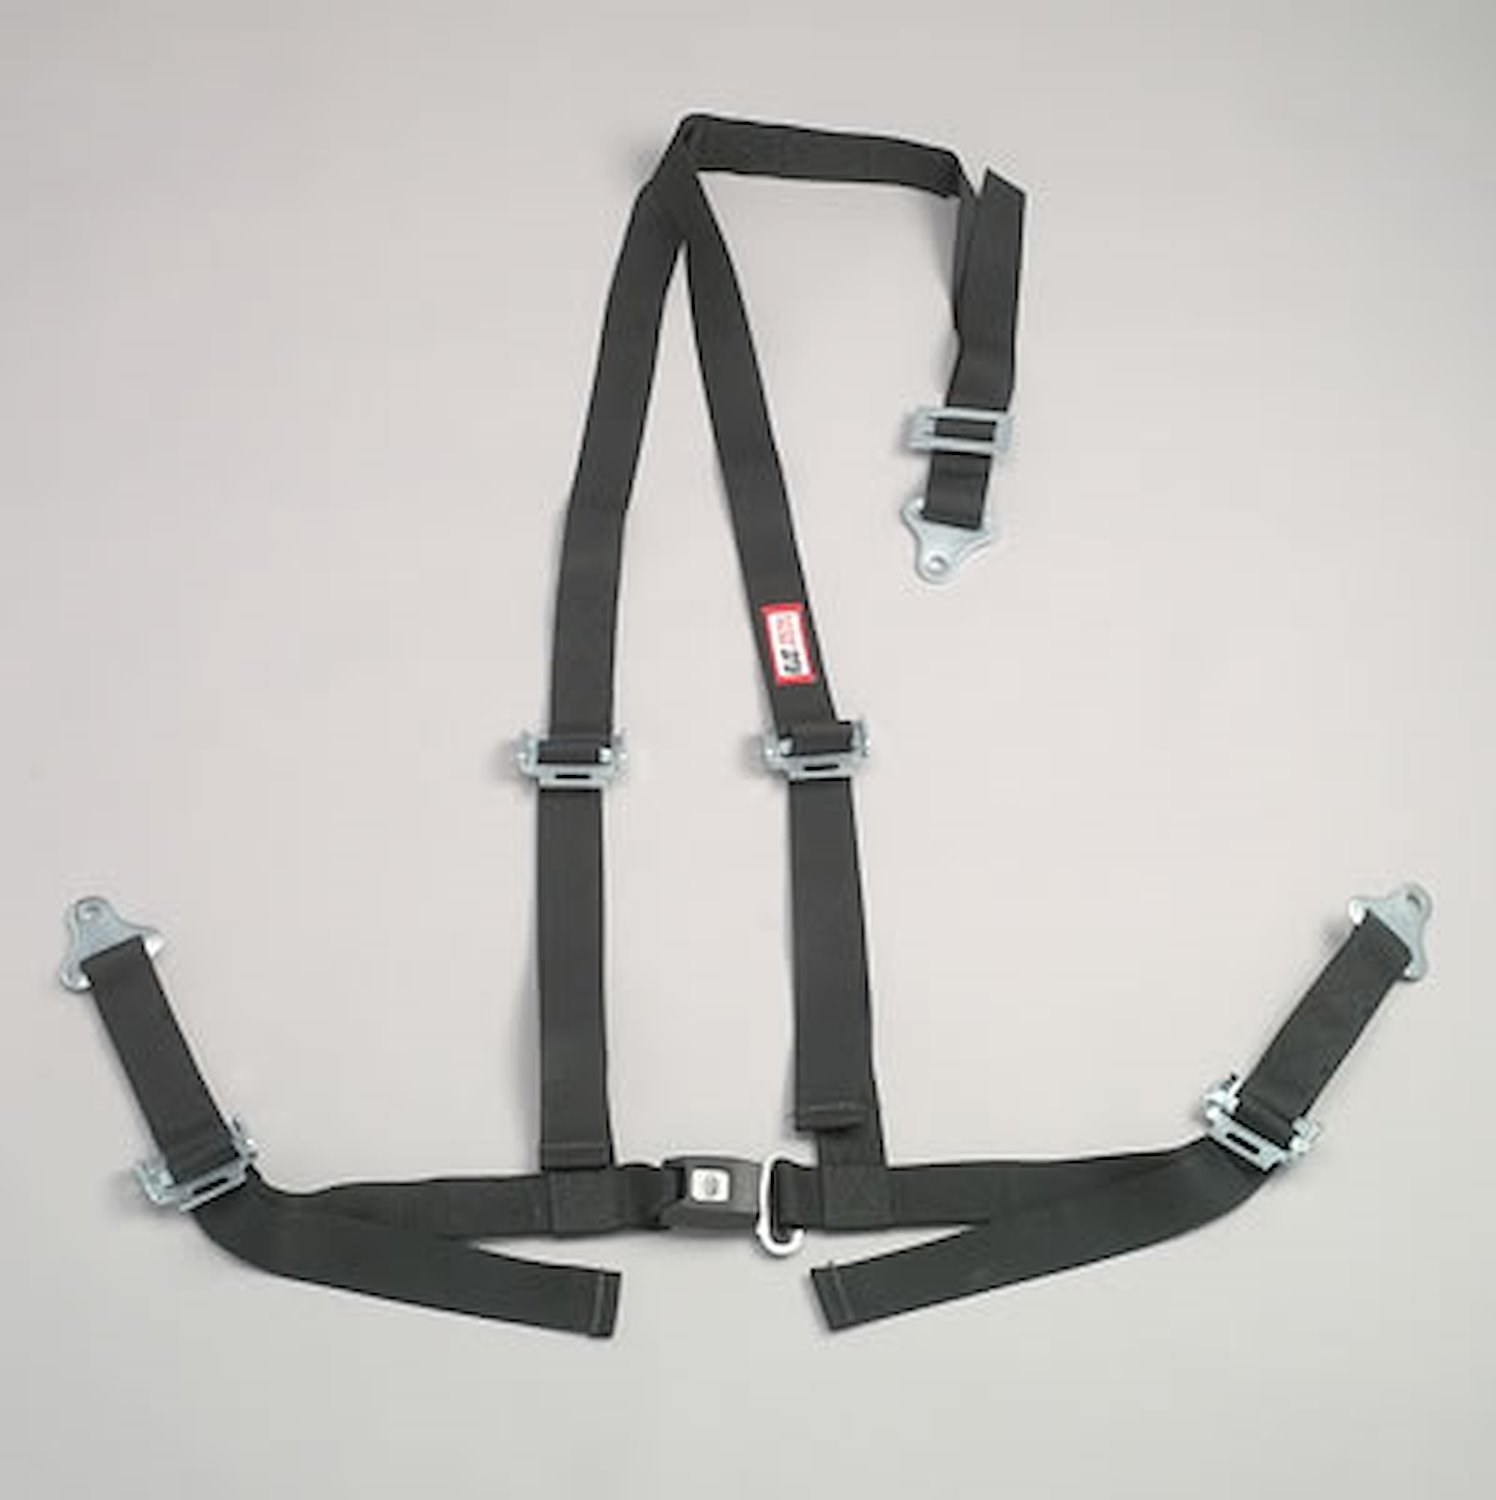 NON-SFI B&T HARNESS 2 PULL DOWN Lap Belt SNAP 2 S. H. Y FLOOR Mount WRAP/BOLT w/STERNUM STRAP RED